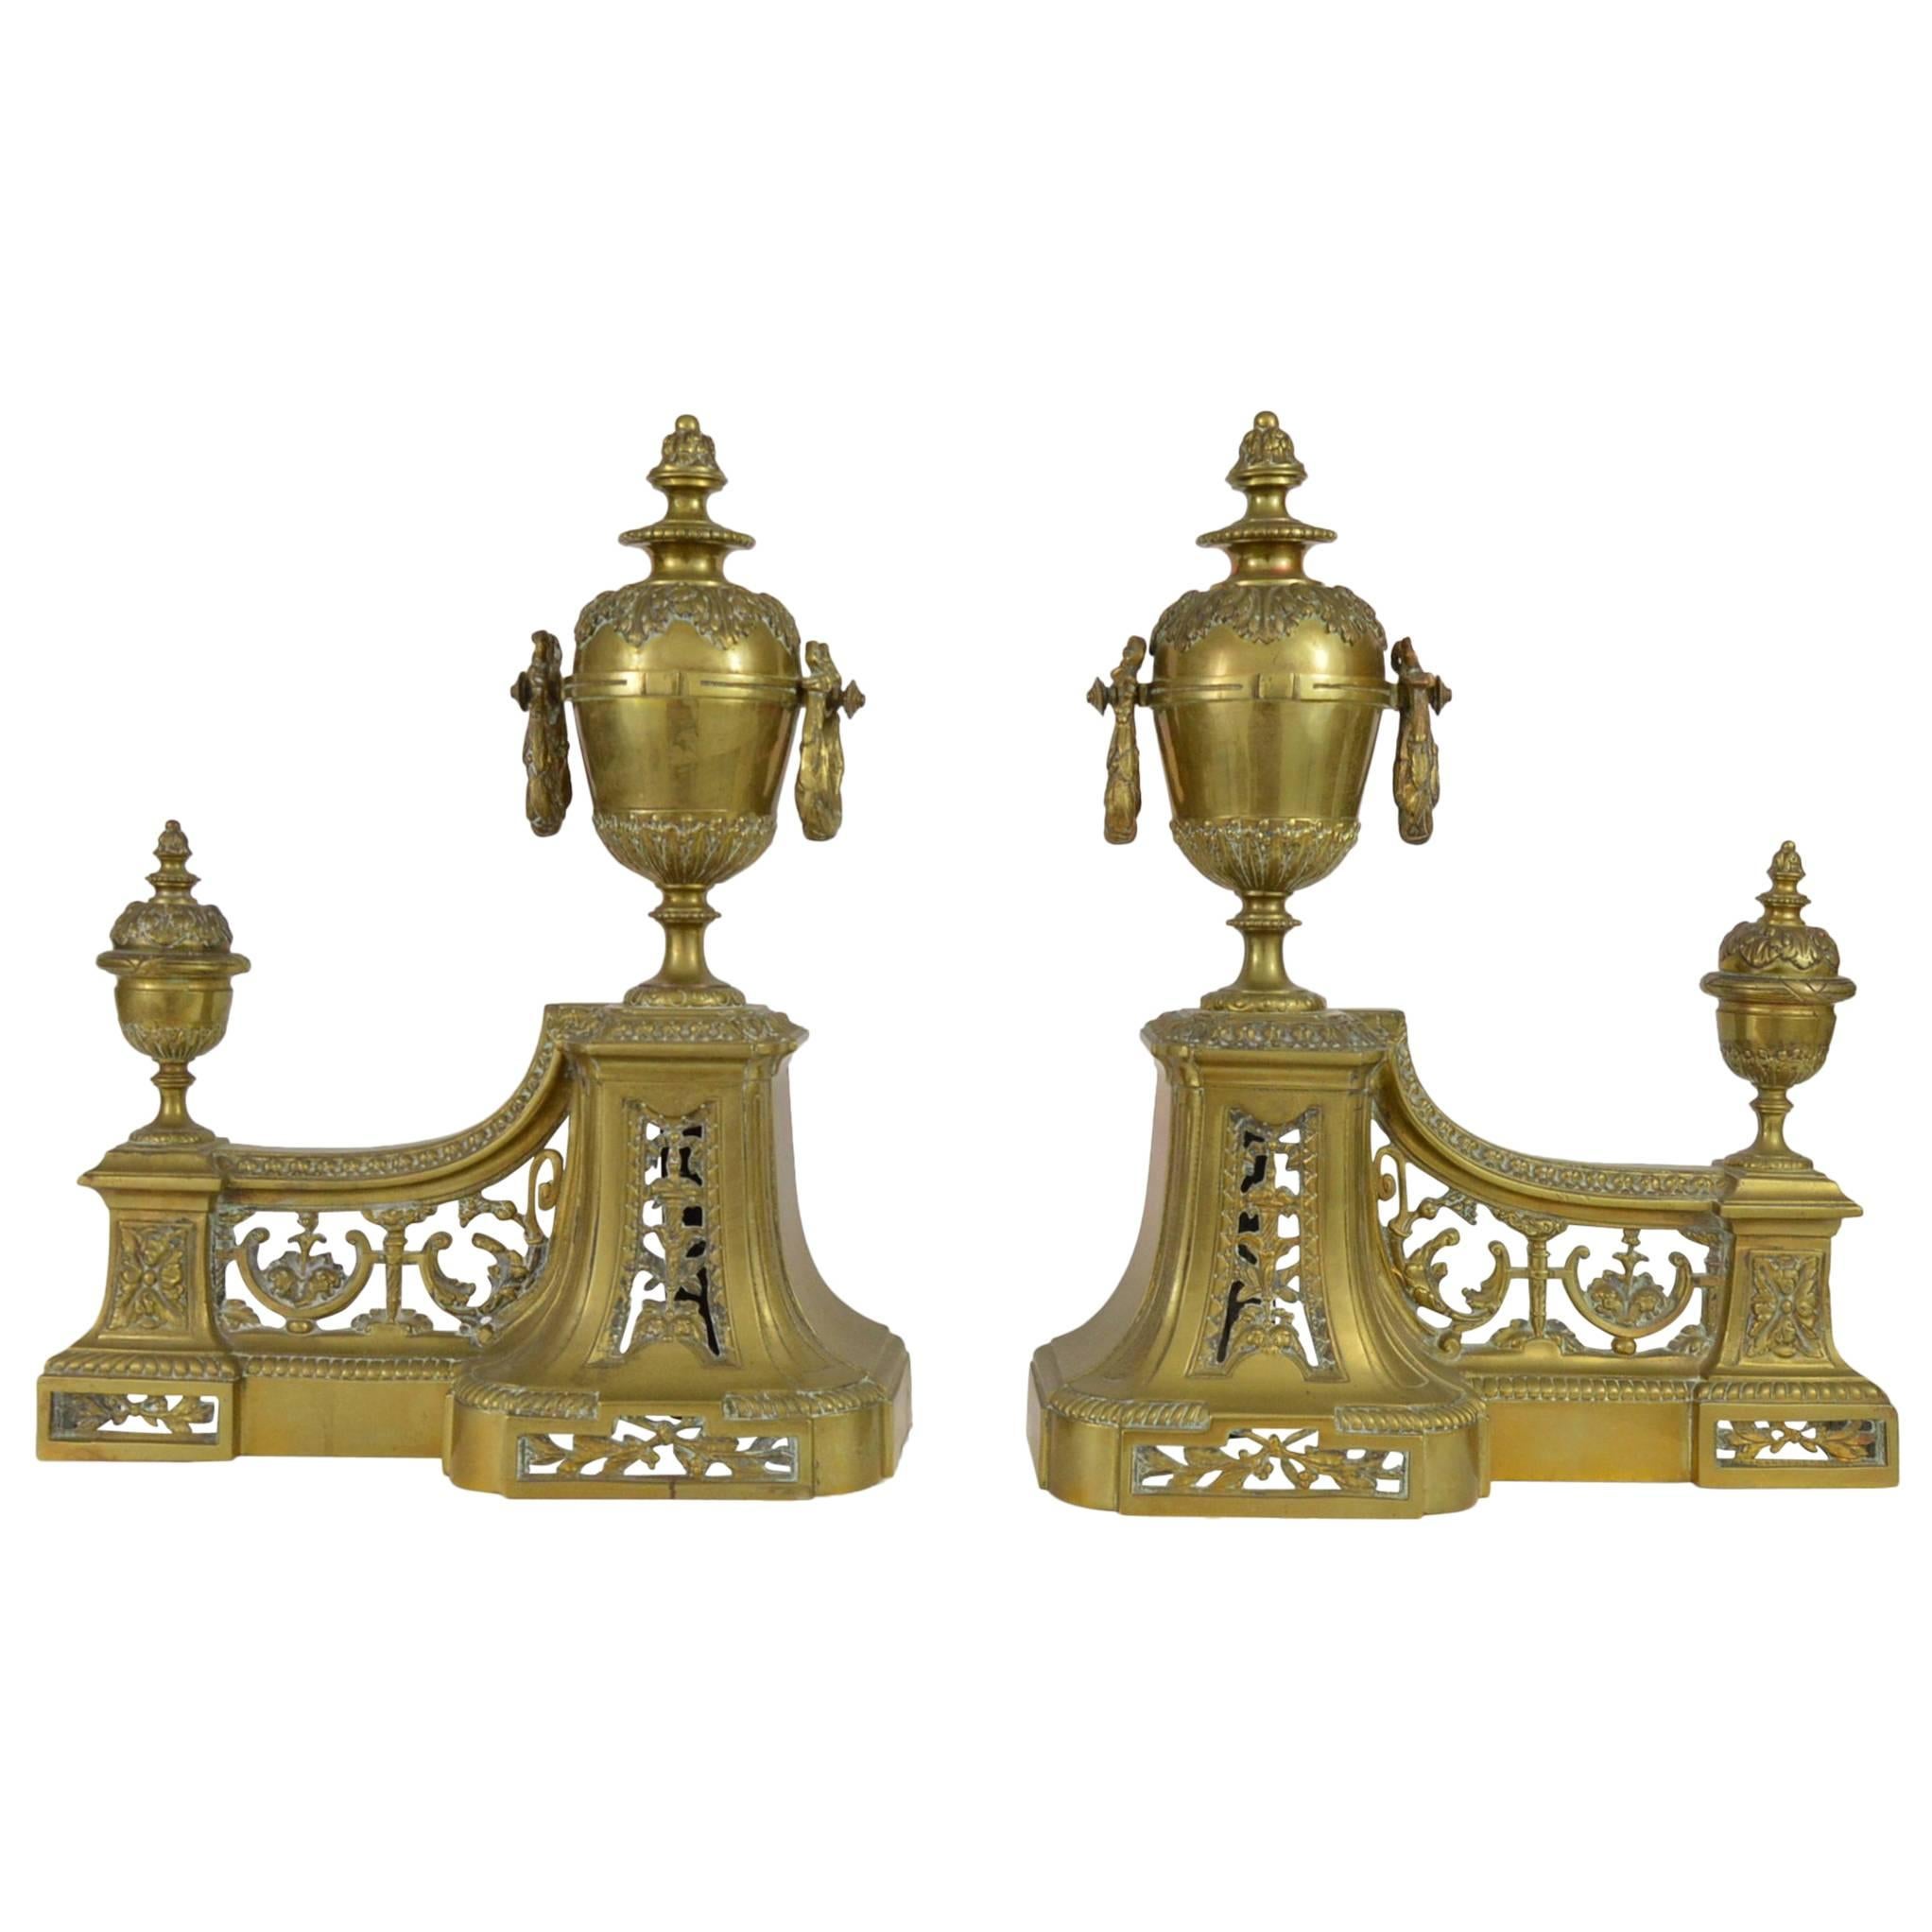 Pair of Antique French Louis XVI Style Bronze Andirons, 19th Century